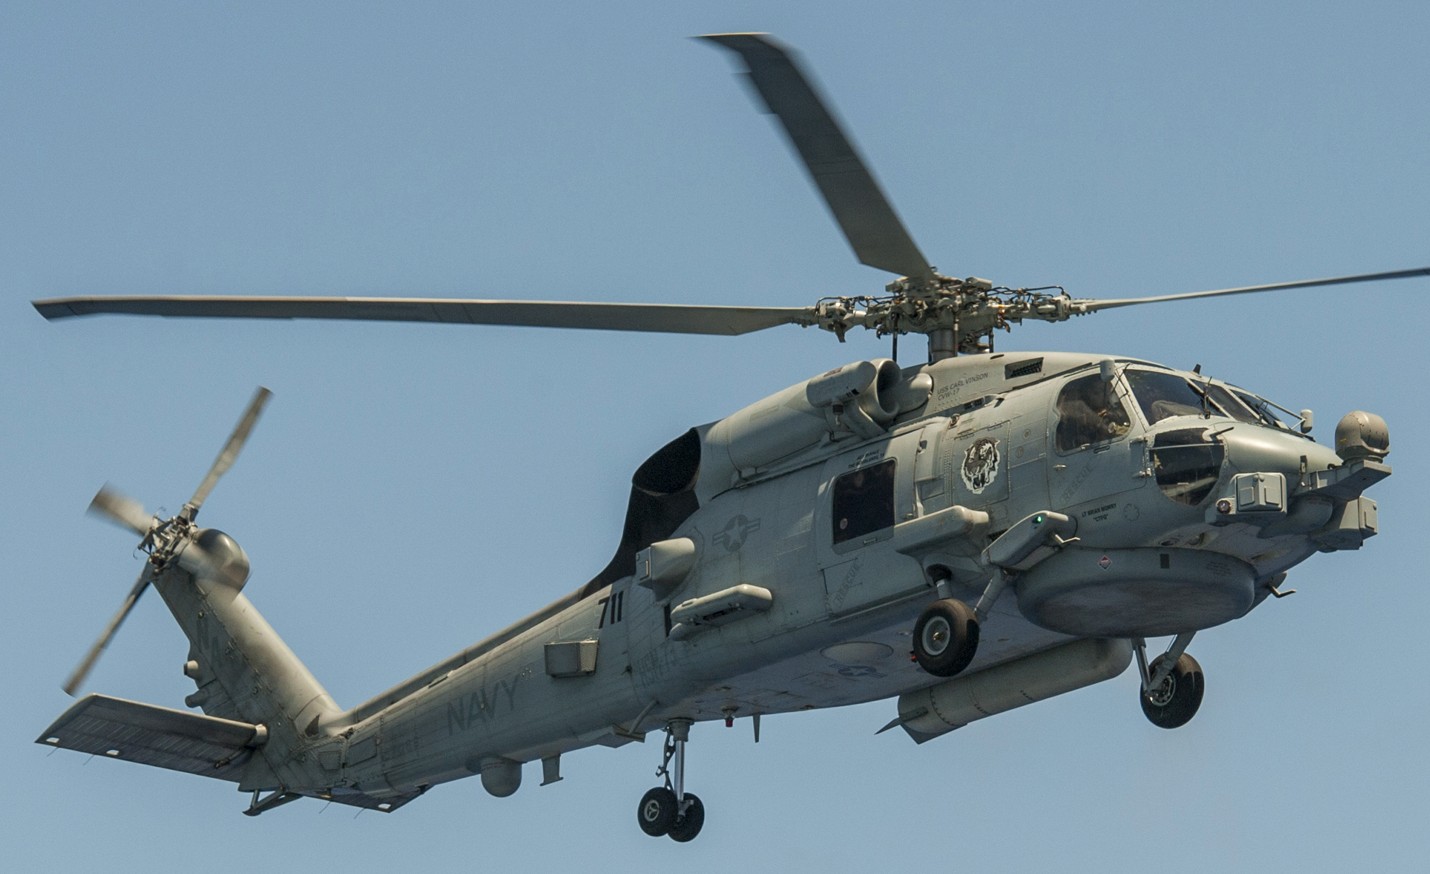 hsm-73 battlecats helicopter maritime strike squadron us navy mh-60r seahawk 2015 47